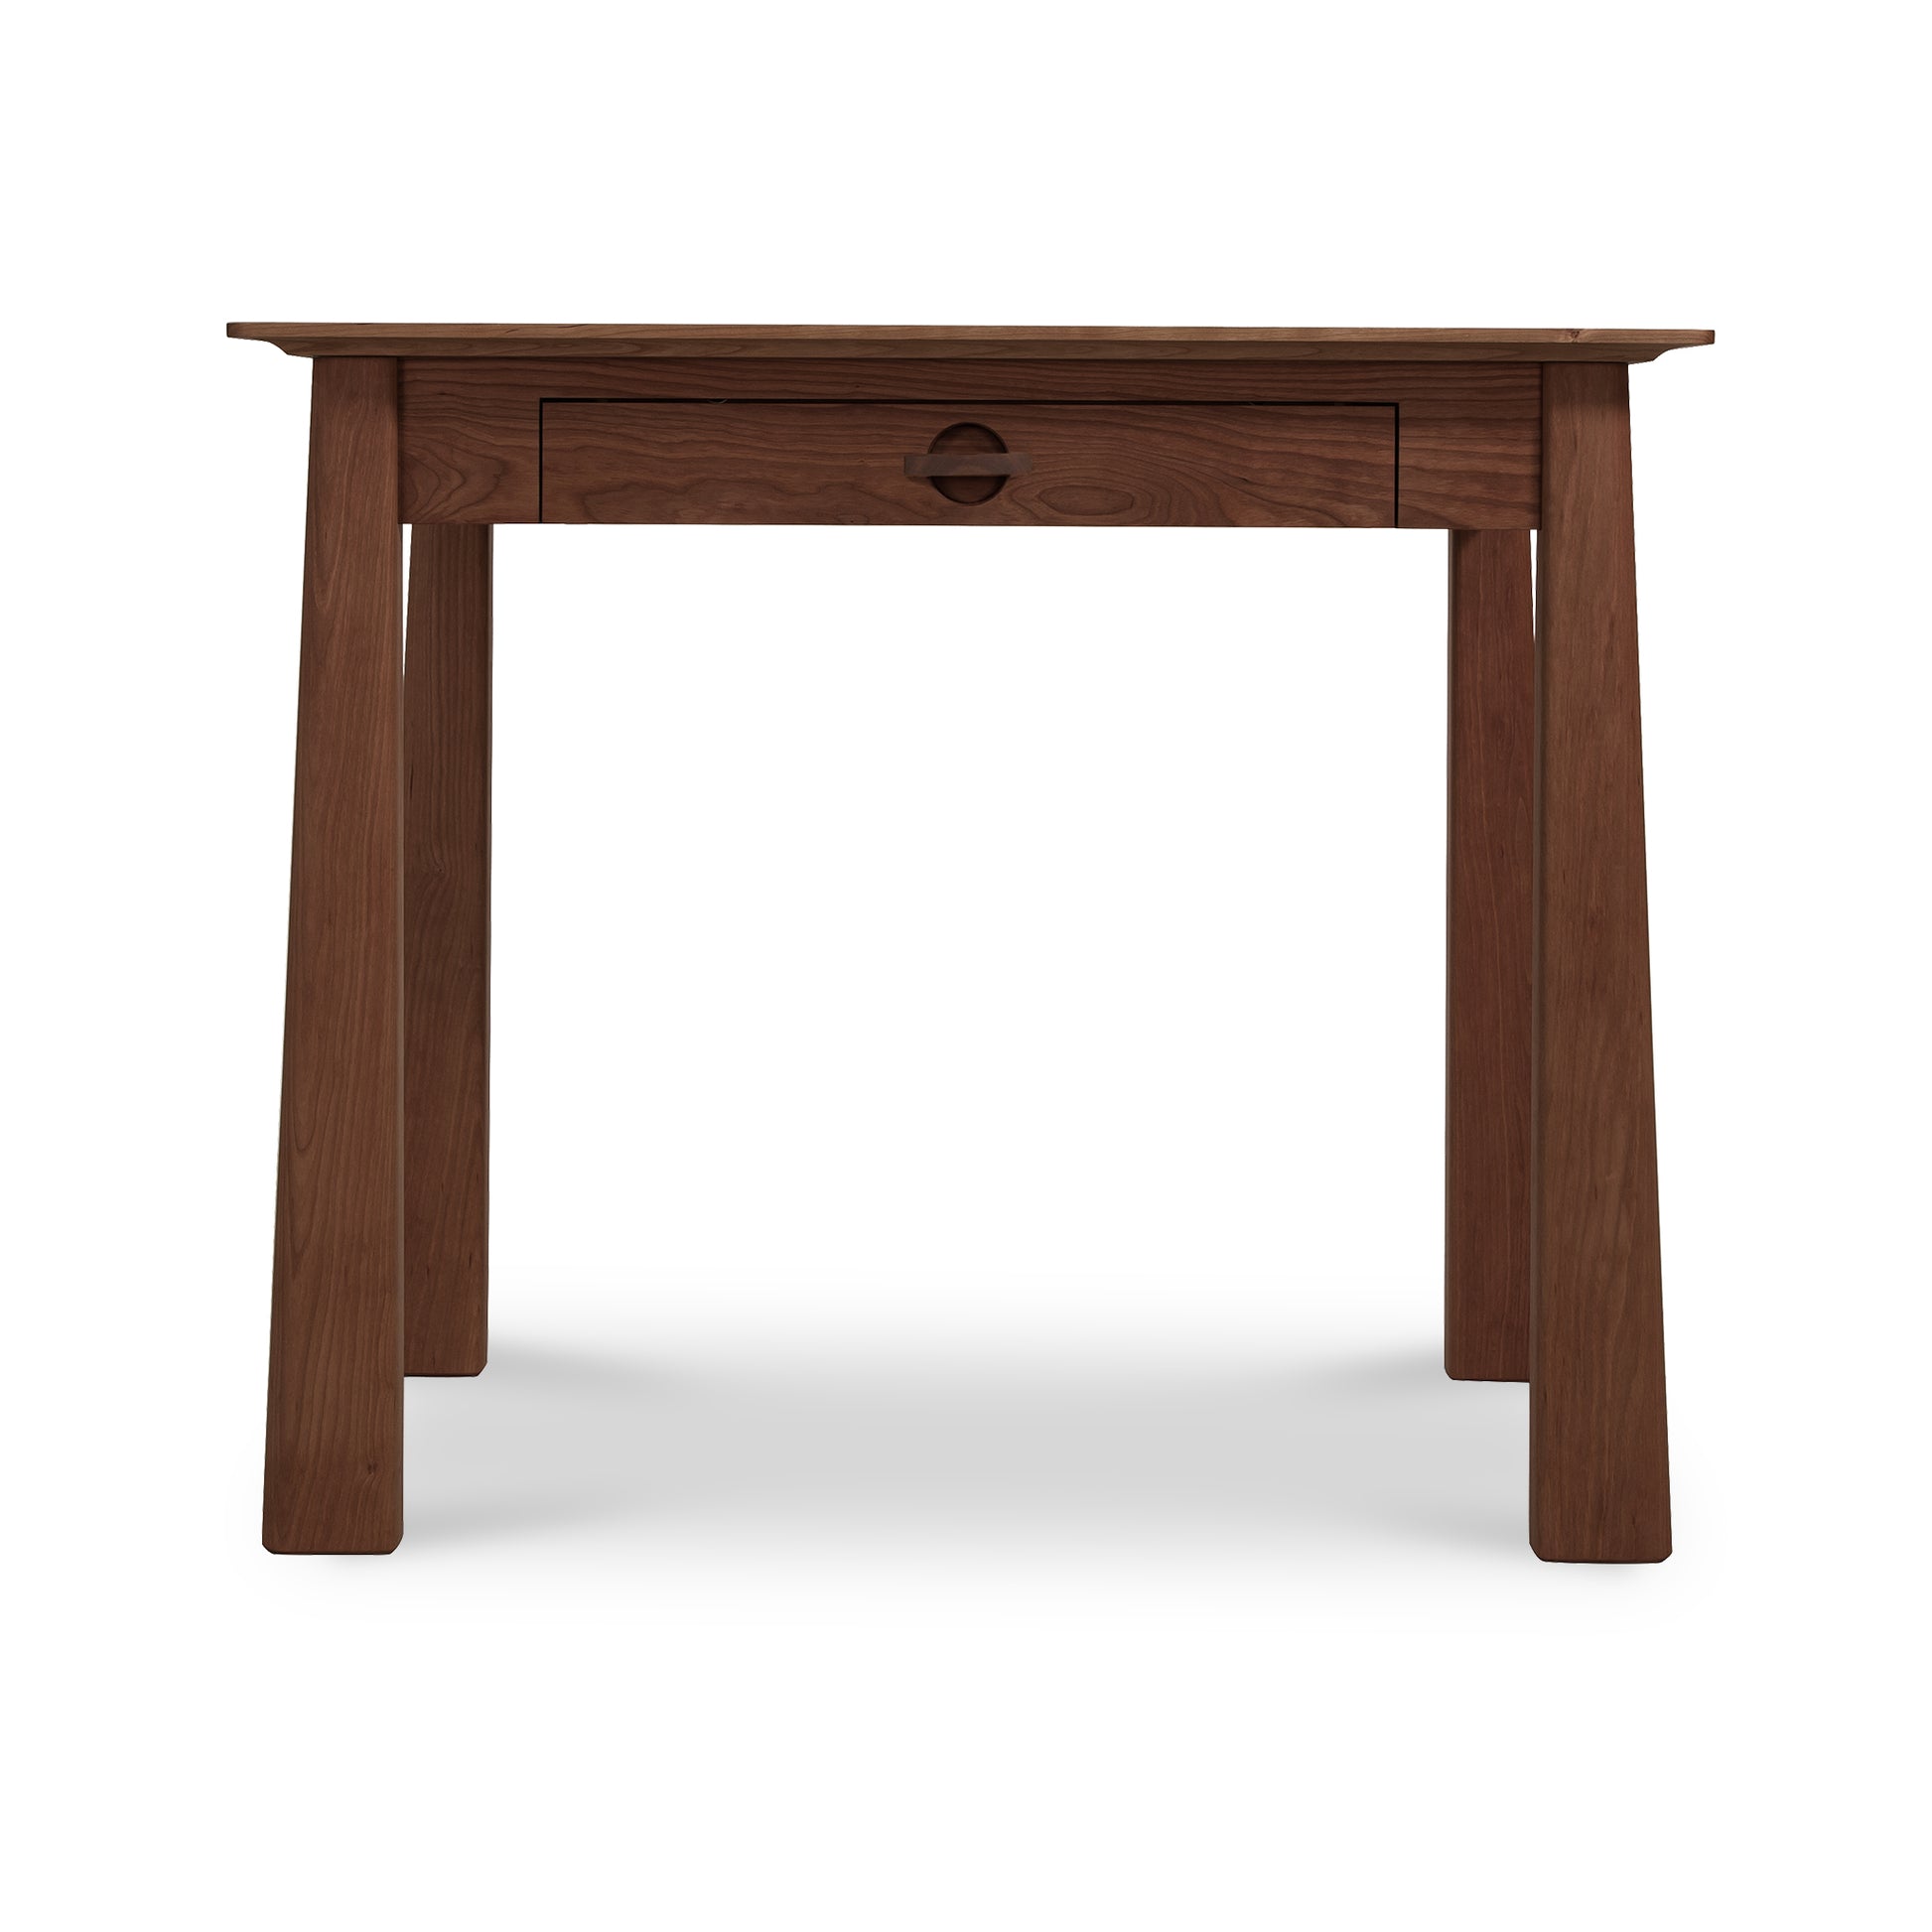 A Maple Corner Woodworks Cherry Moon Writing Desk, viewed from the front against a white background.